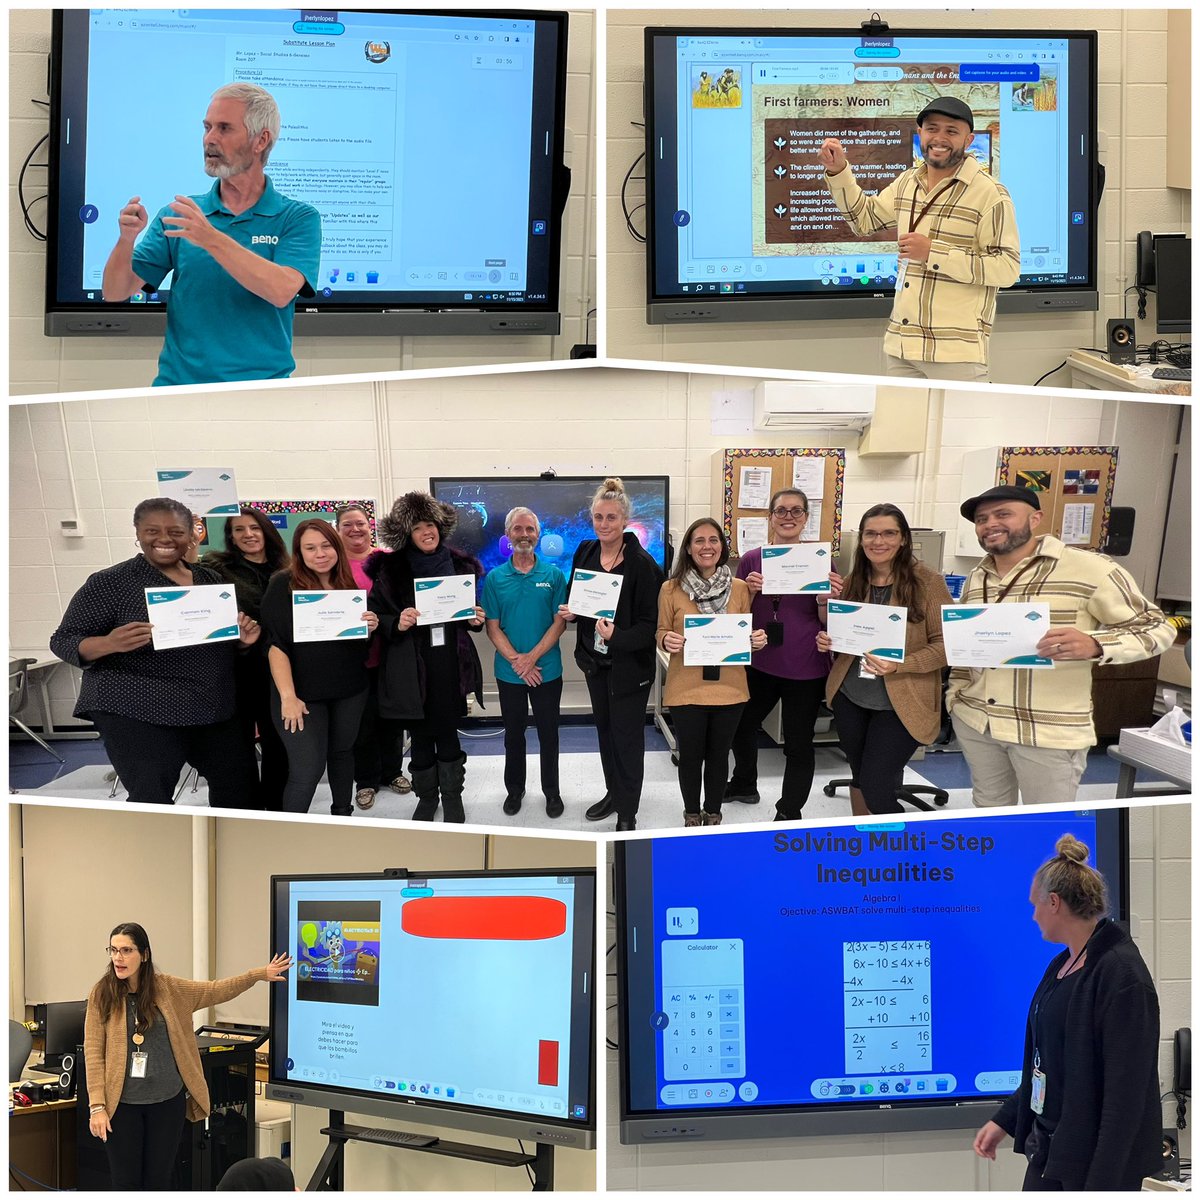 Congratulations to our new cohort of White Plains teachers who achieved BenQ educator certification status last evening. The teachers presented their final projects showcasing outstanding lesson plans integrating the BenQ multitouch display and the embedded applications. #WPProud